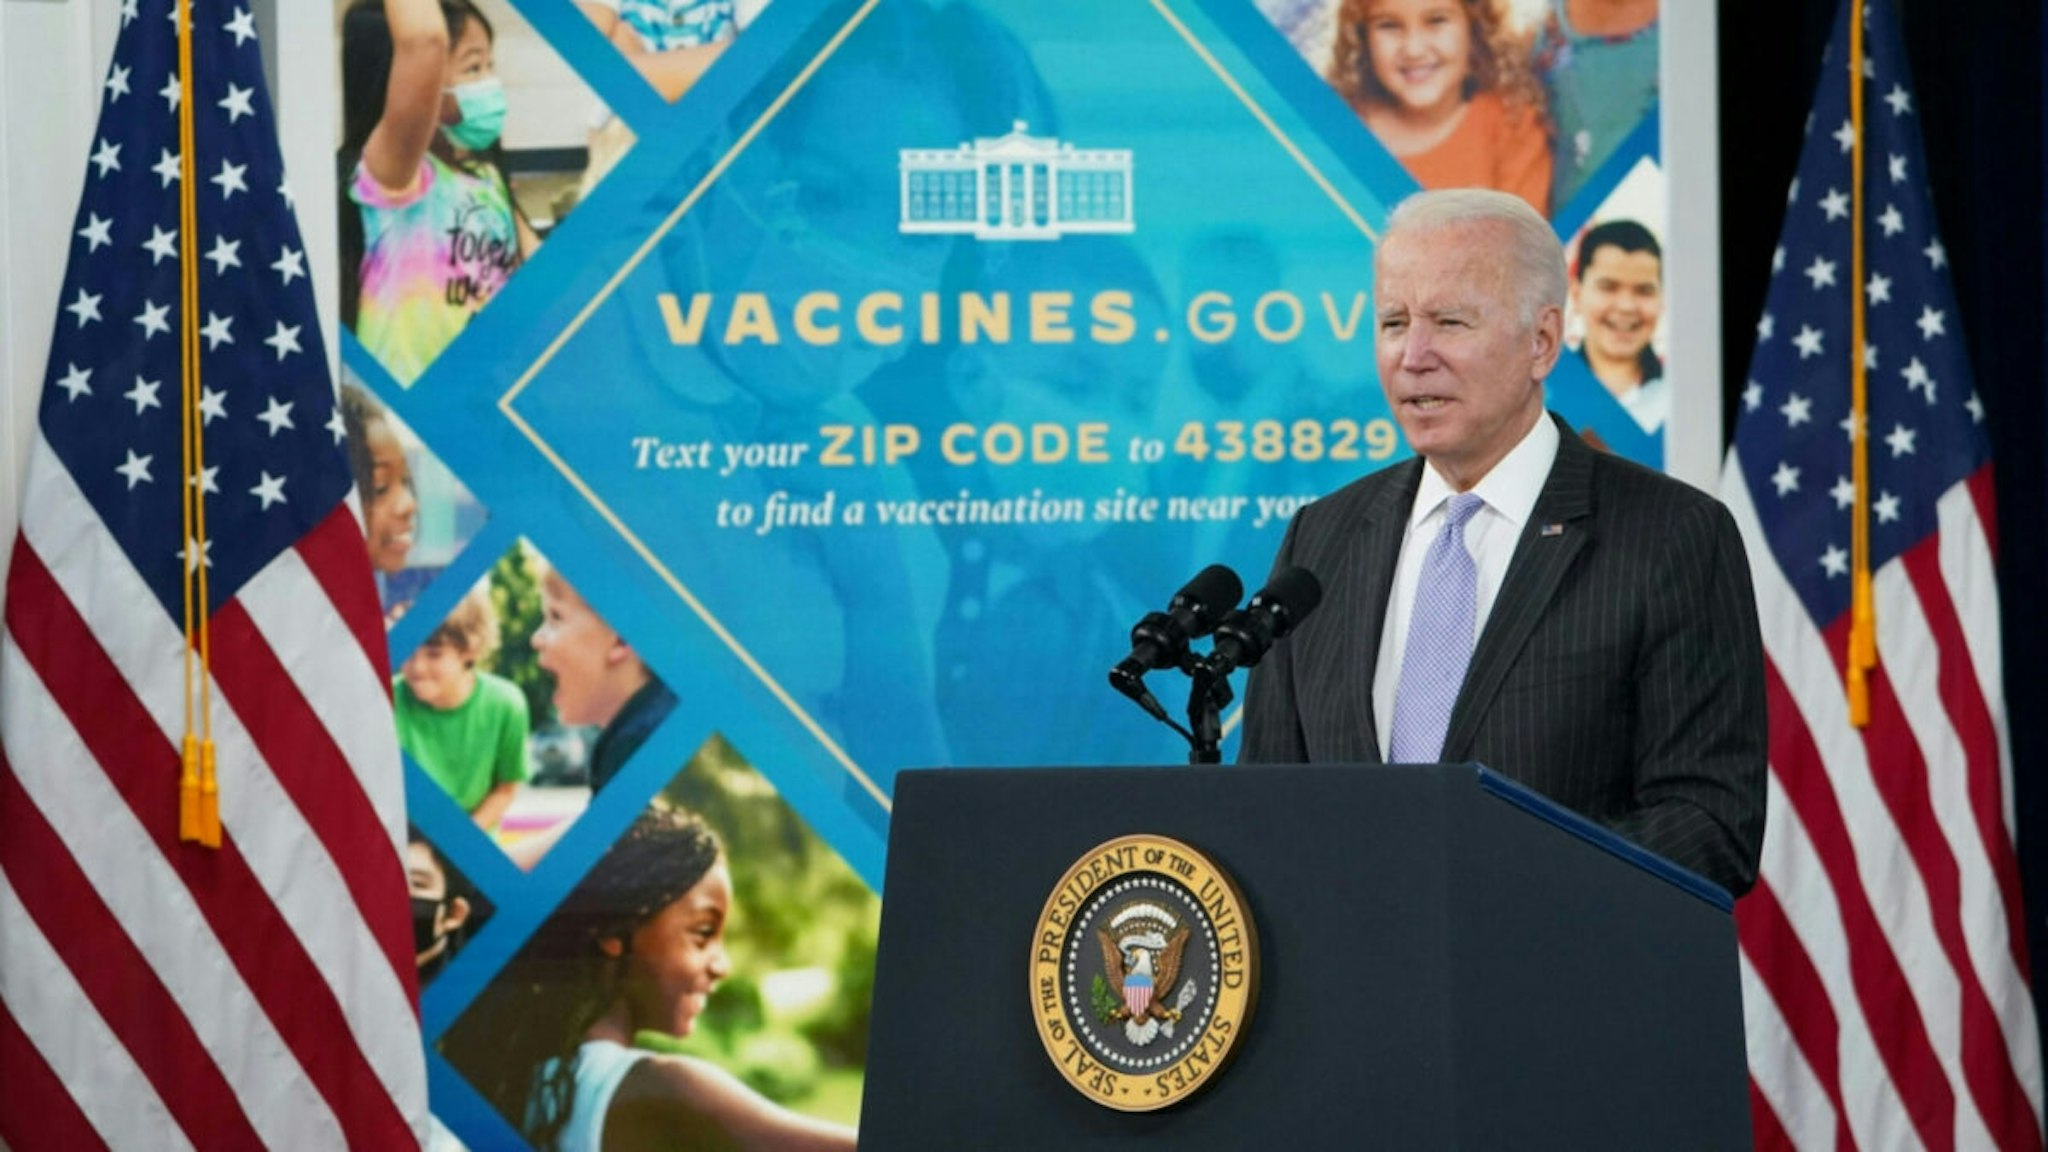 US President Joe Biden speaks on the authorization of the Covid-19 vaccine for children aged 5 to 11 in the South Court Auditorium, next to the White House, in Washington, DC on November 3, 2021.